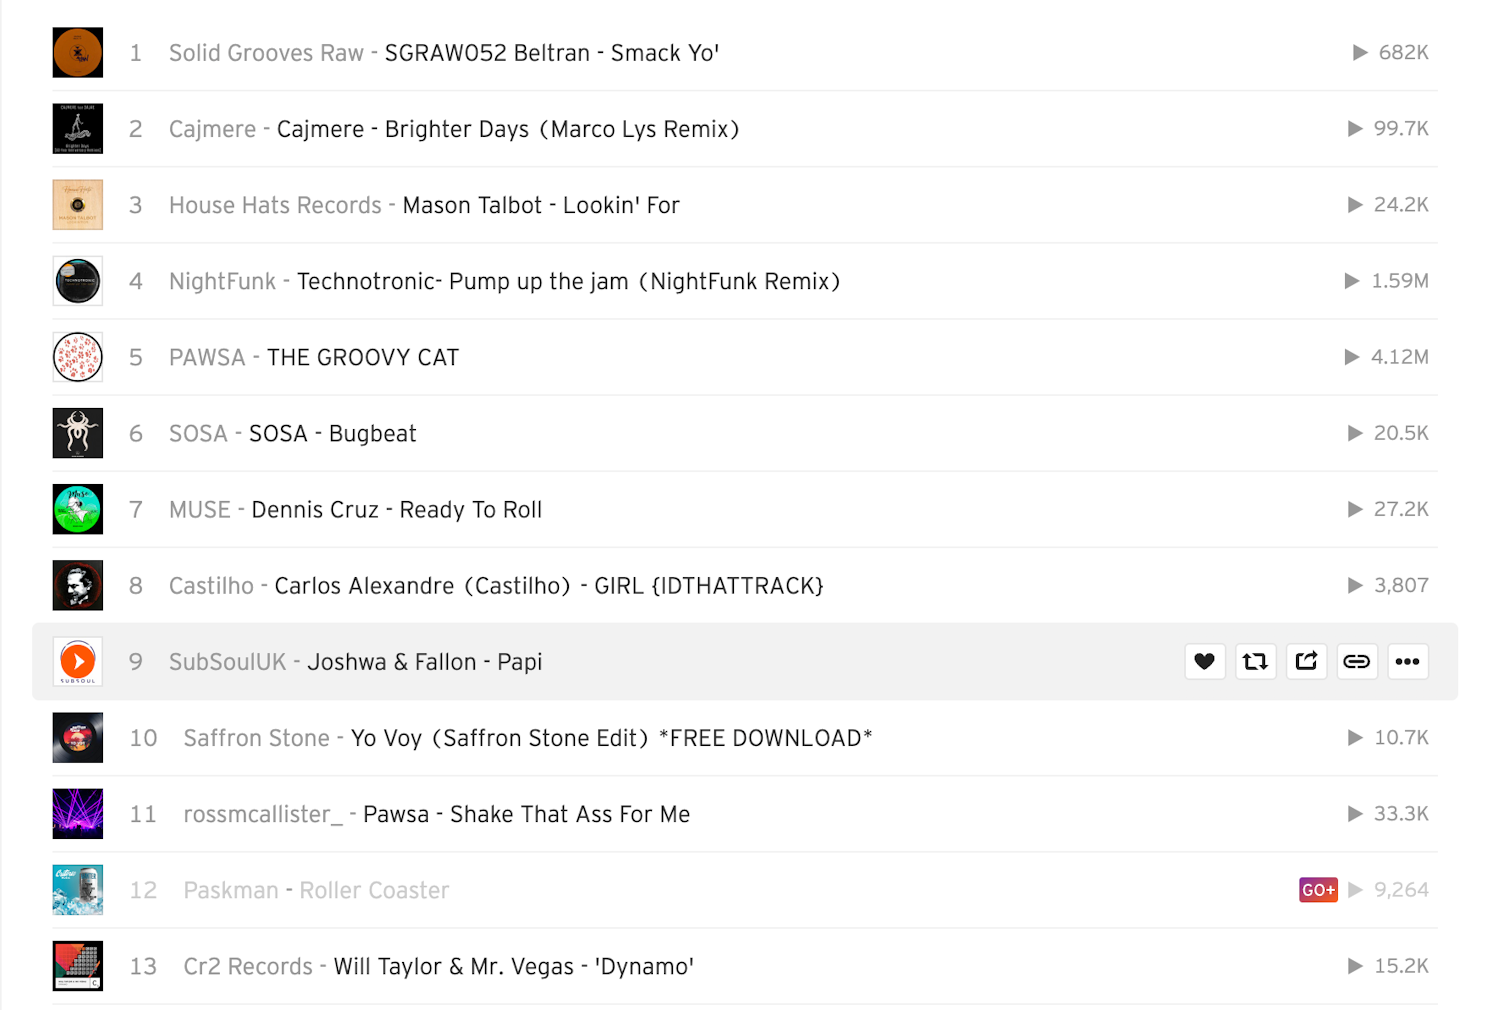 Soundcloud can curate playlists based on songs you already liked